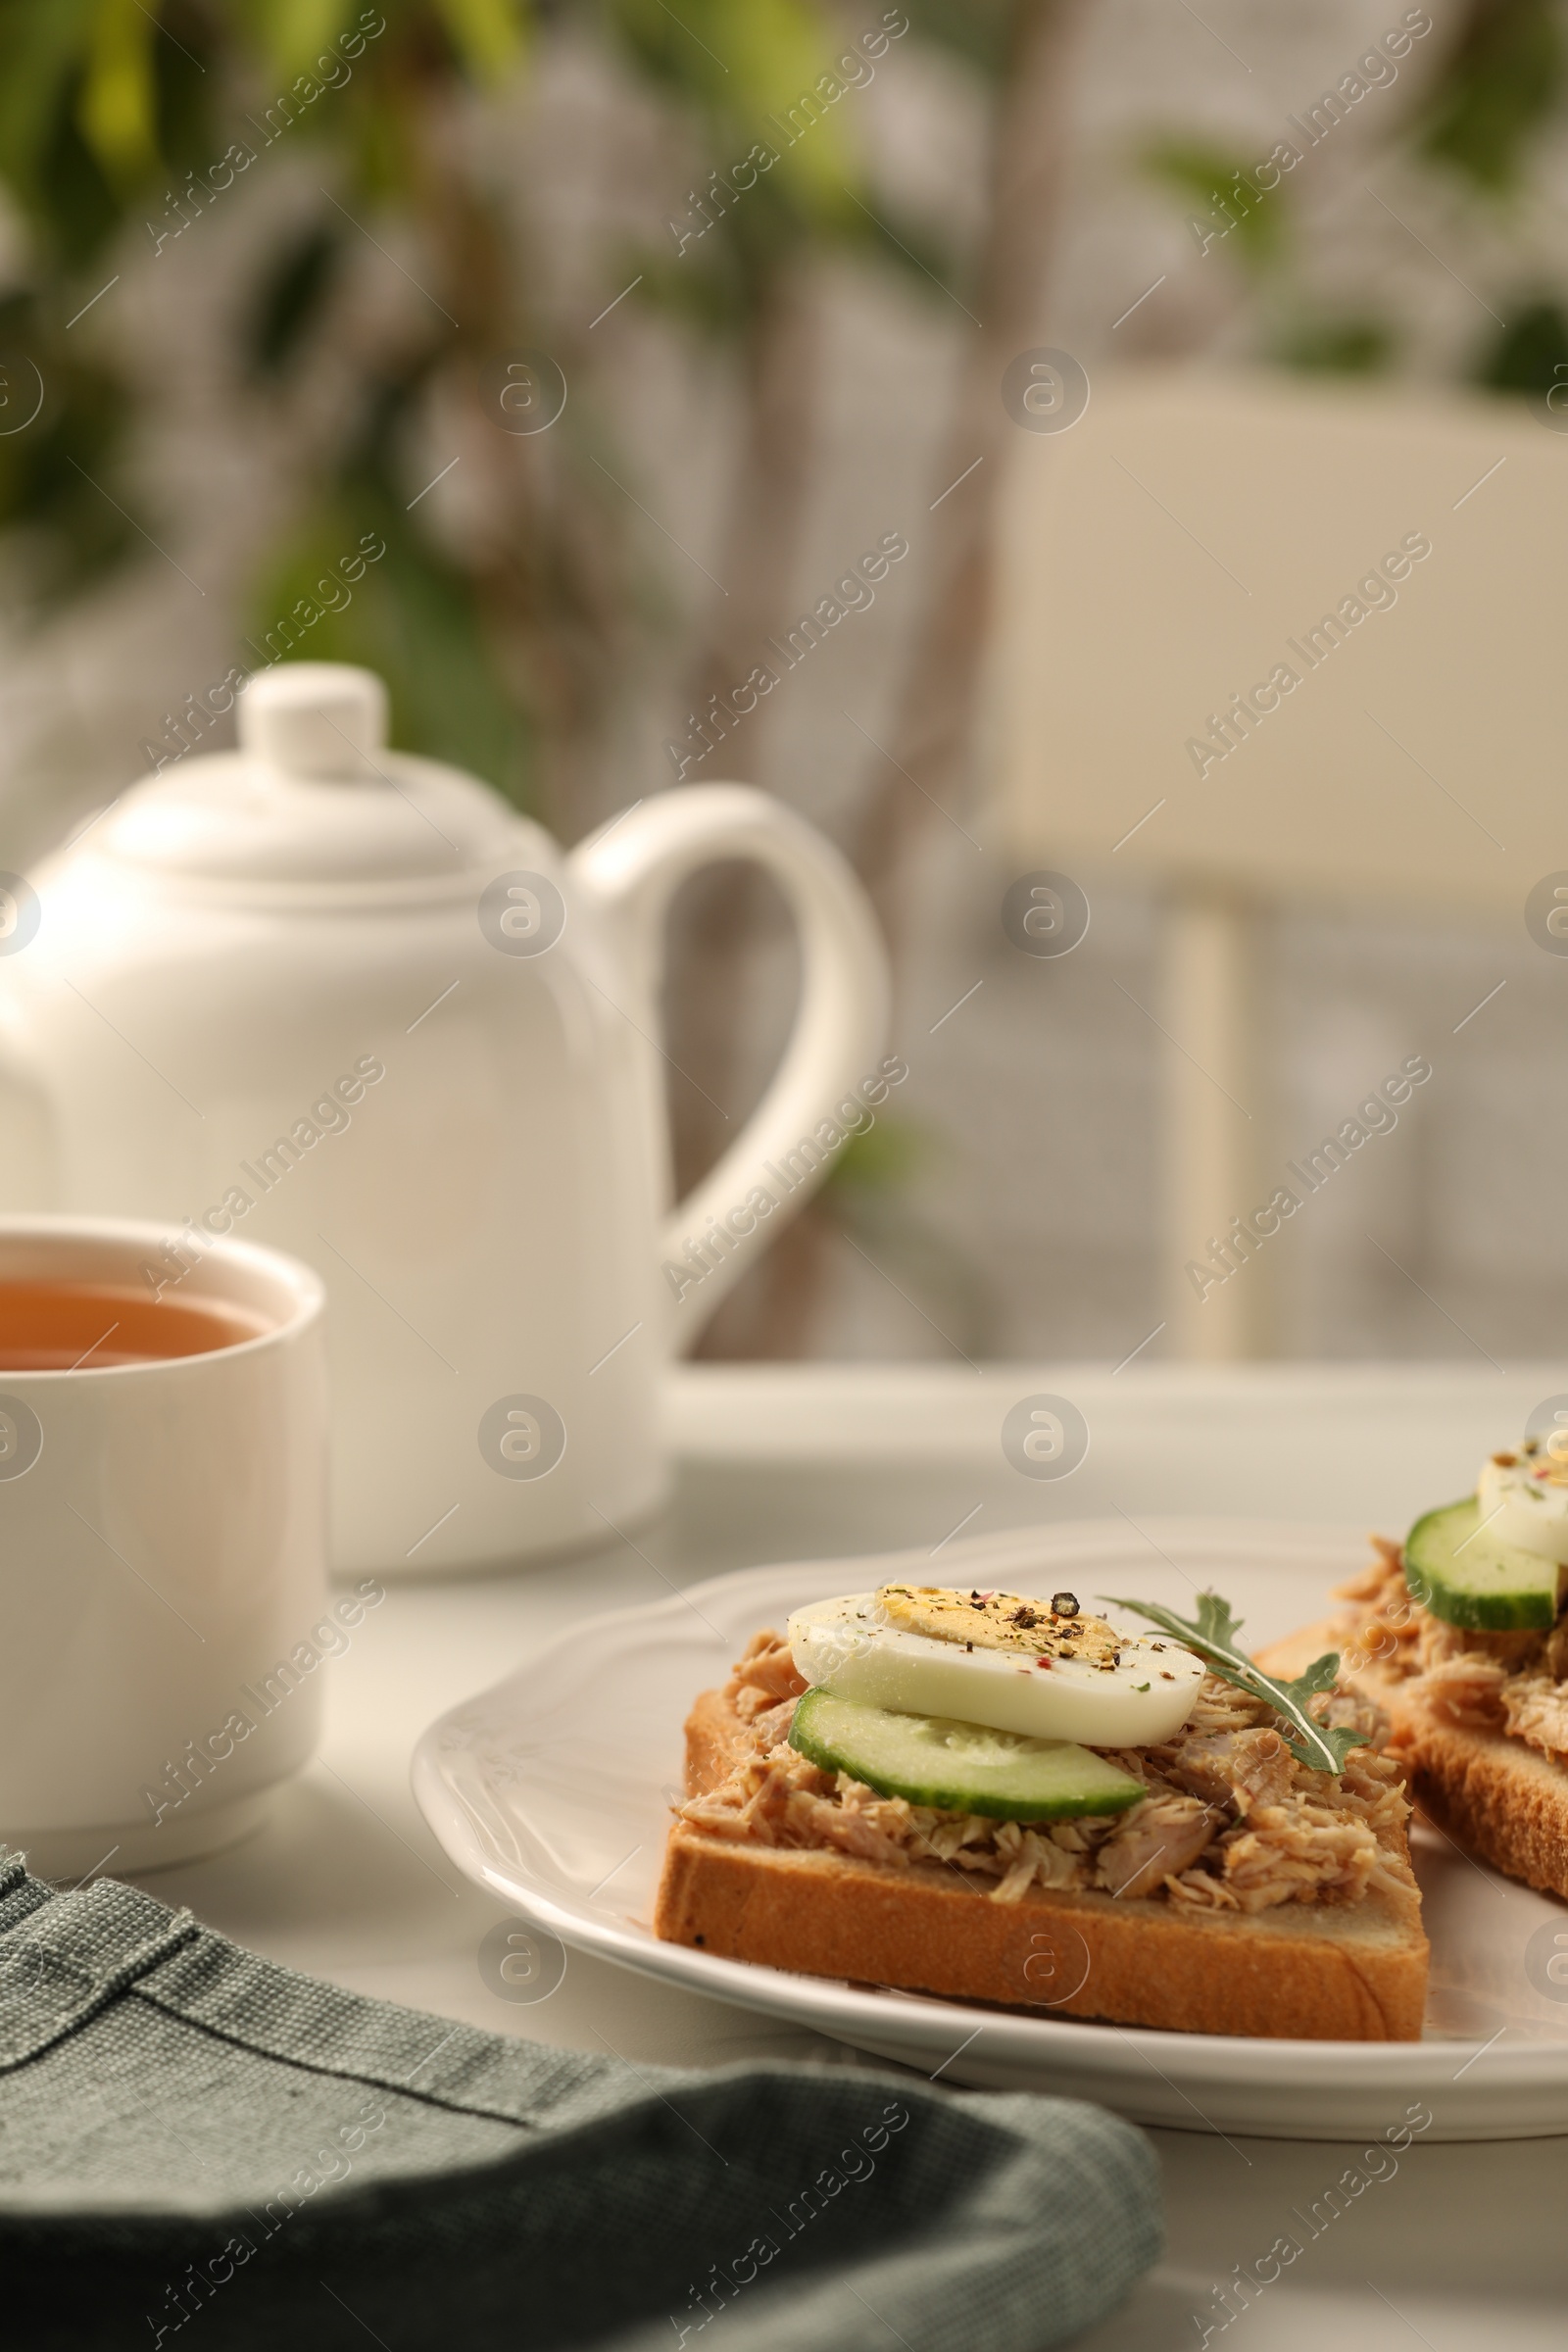 Photo of Delicious sandwiches with tuna, vegetables, boiled egg and cup of tea on white table indoors, closeup. Tasty breakfast